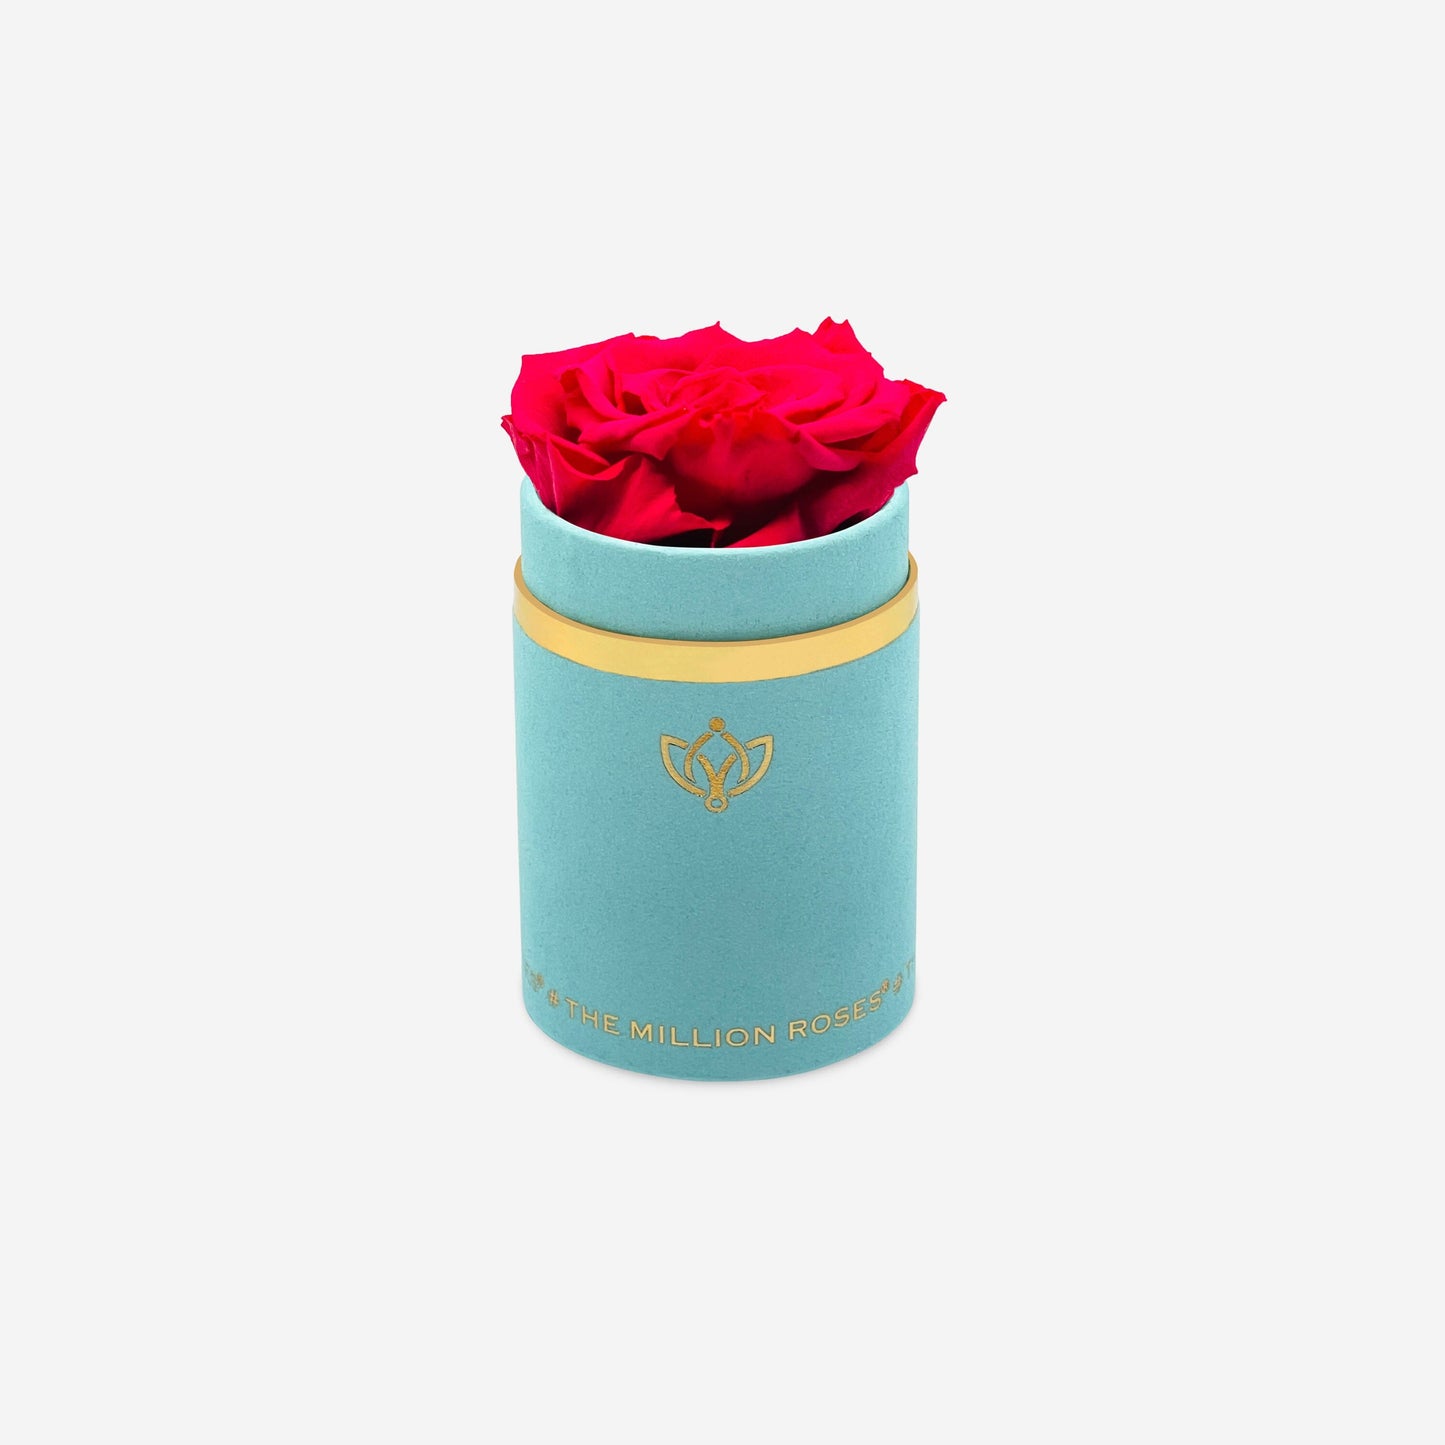 Single Mint Green Suede Box | Hot Pink Rose - The Million Roses